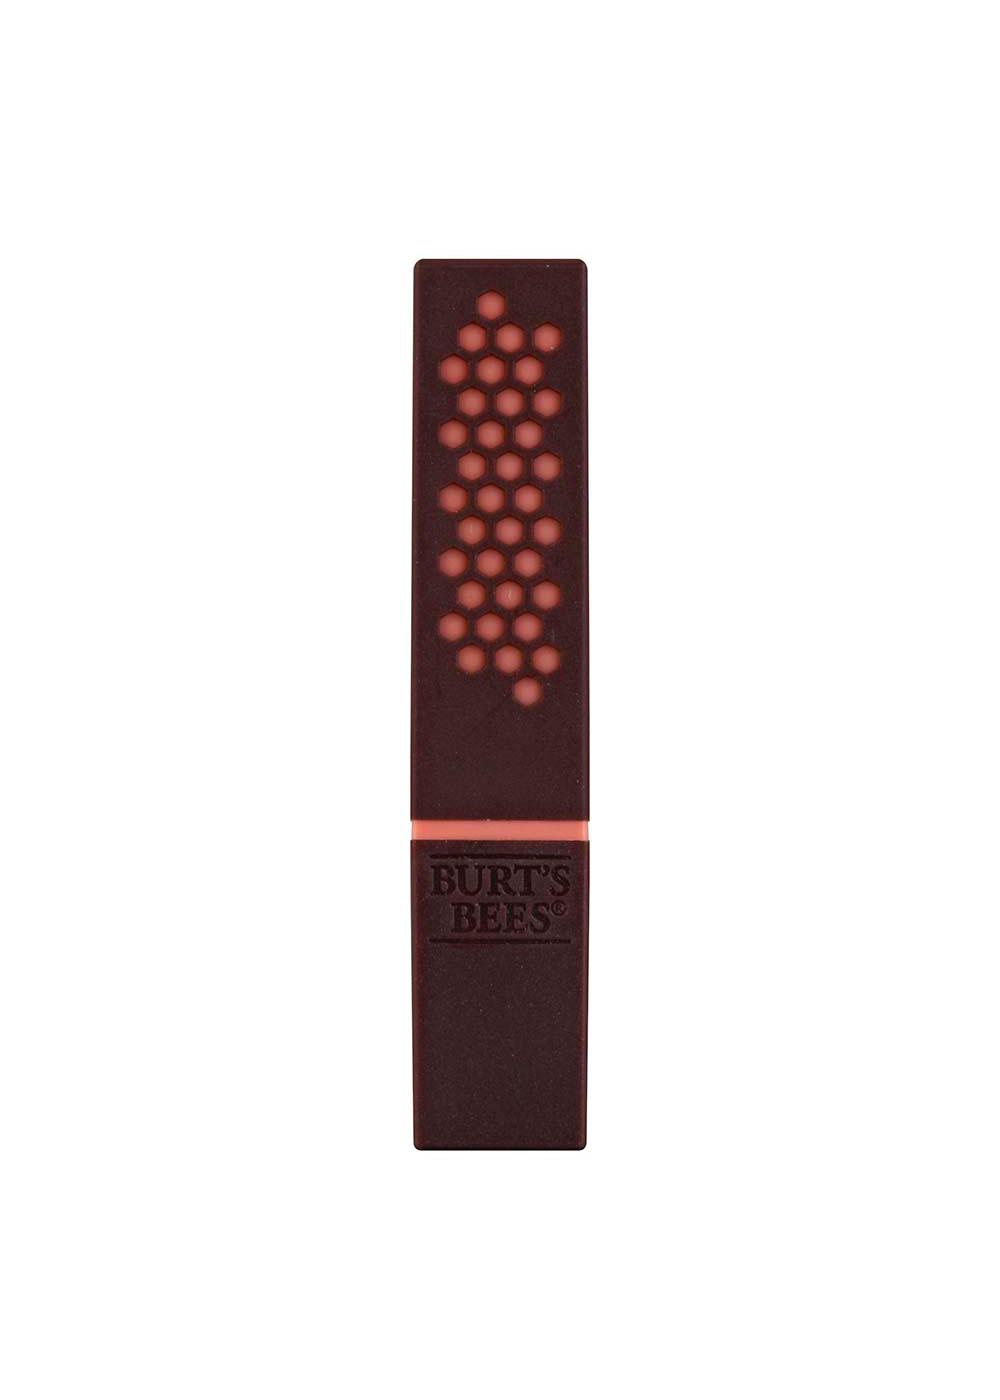 Burt's Bees Natural Glossy Lipstick - Nude Mist; image 1 of 2